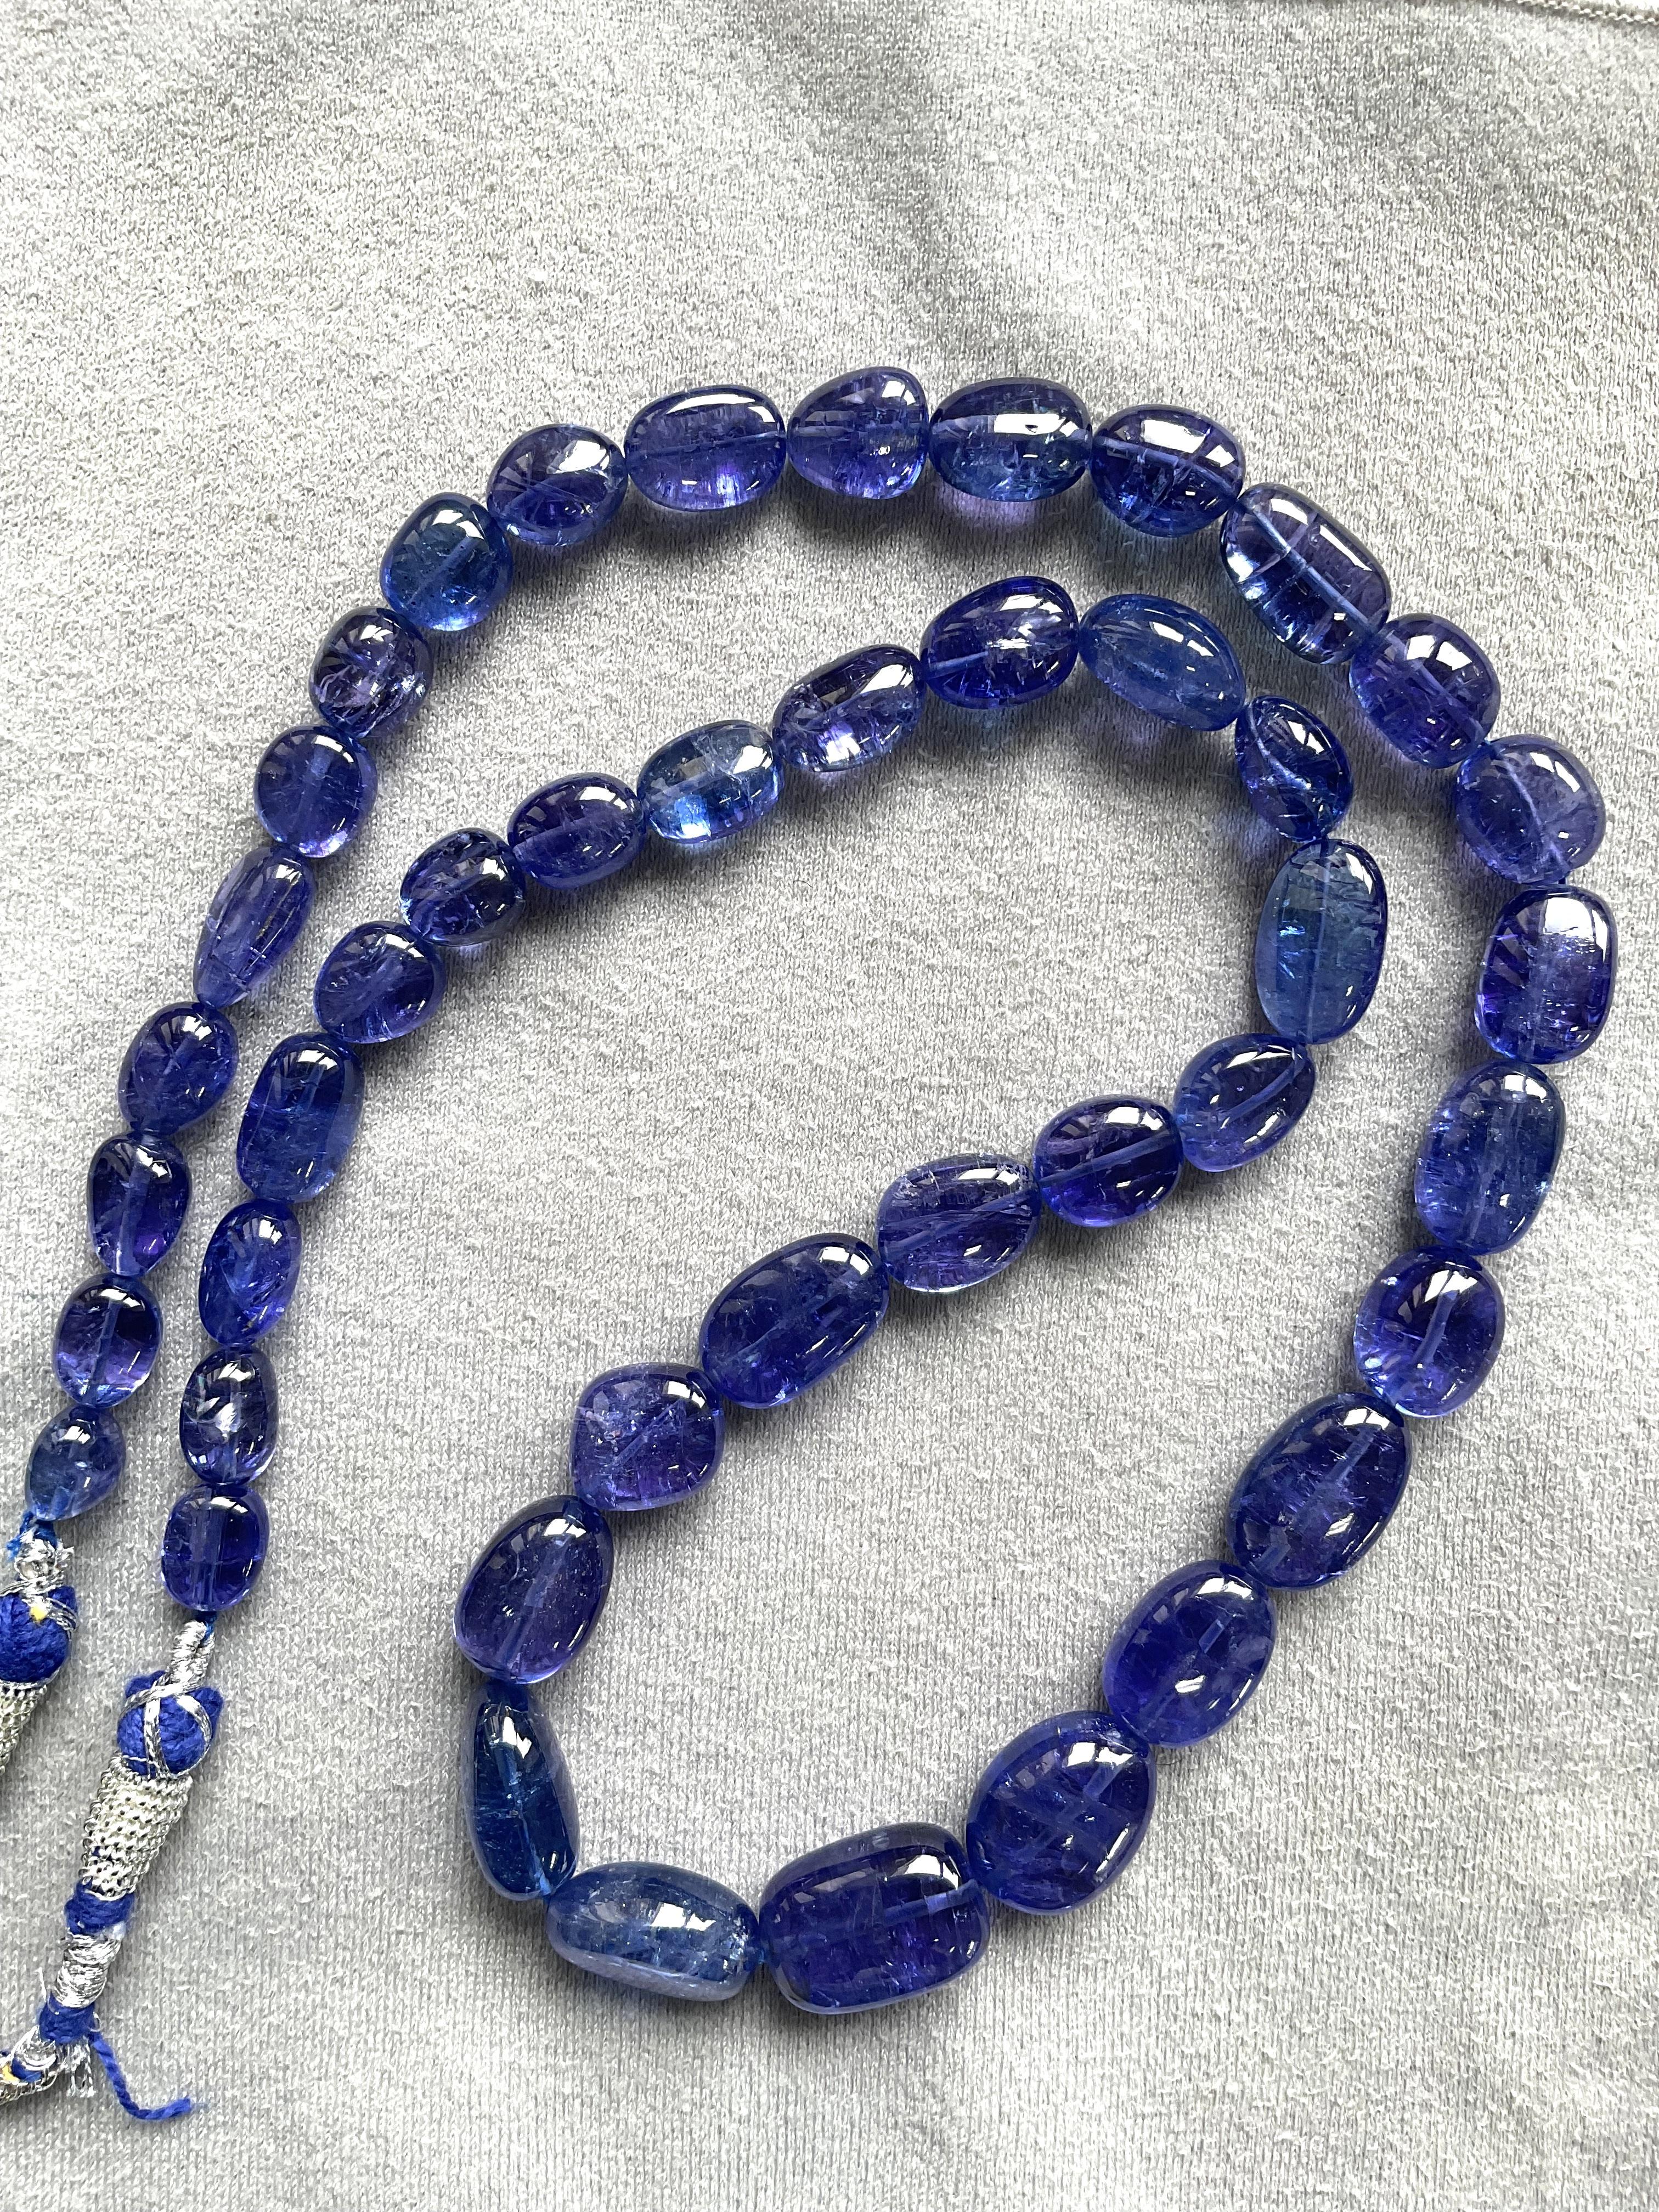 461.15 Carats Tanzanite Top Quality Plain Tumble For Fine Jewelry Natural Gem 
Weight - 461.15 Ct 
Size  - 8x10 To 14x11 MM
Quantity - 1  Strand
